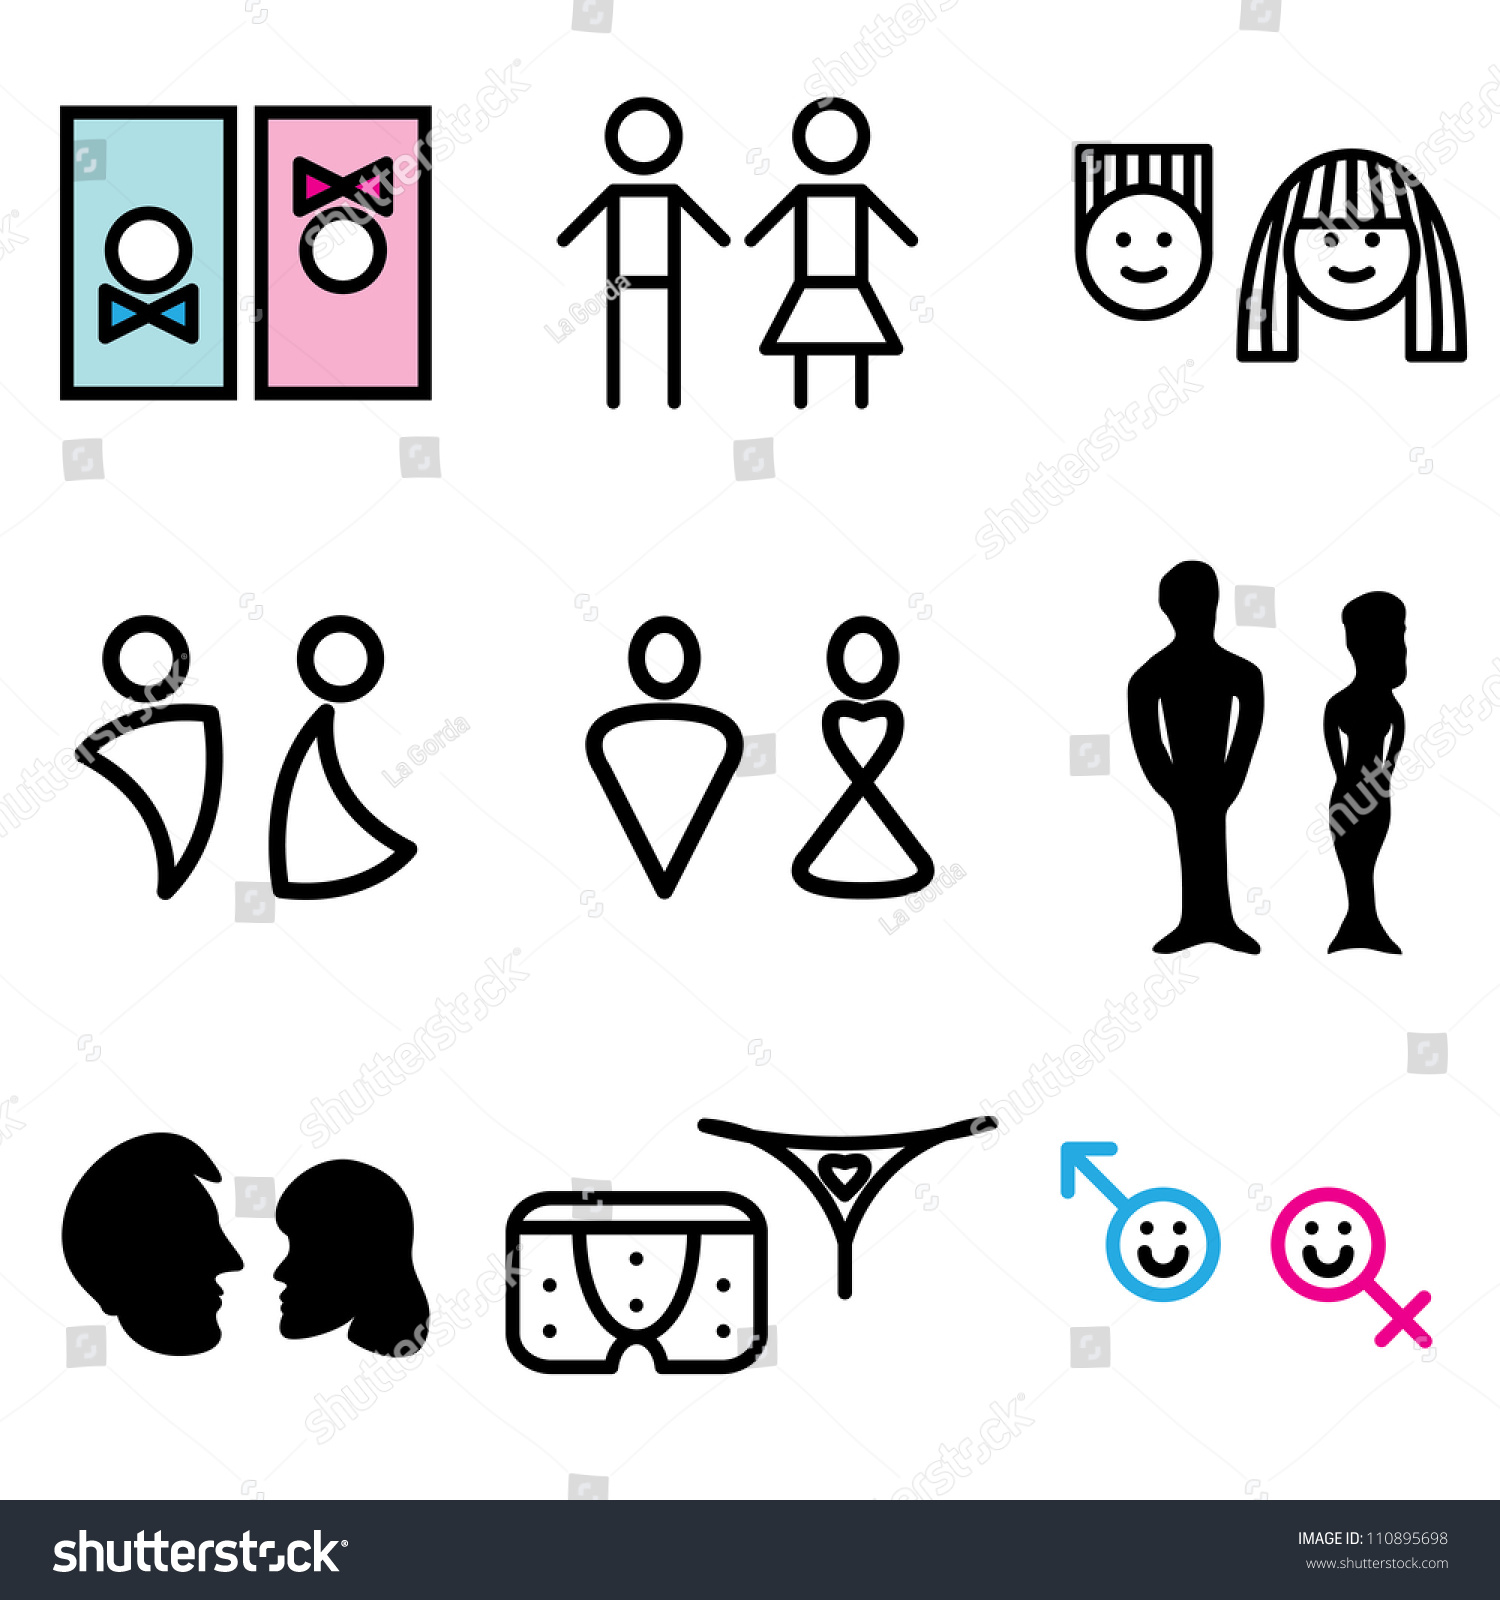 Toilet Symbols Hand Drawn Icons Vector Stock Vector Royalty Free 110895698 Shutterstock